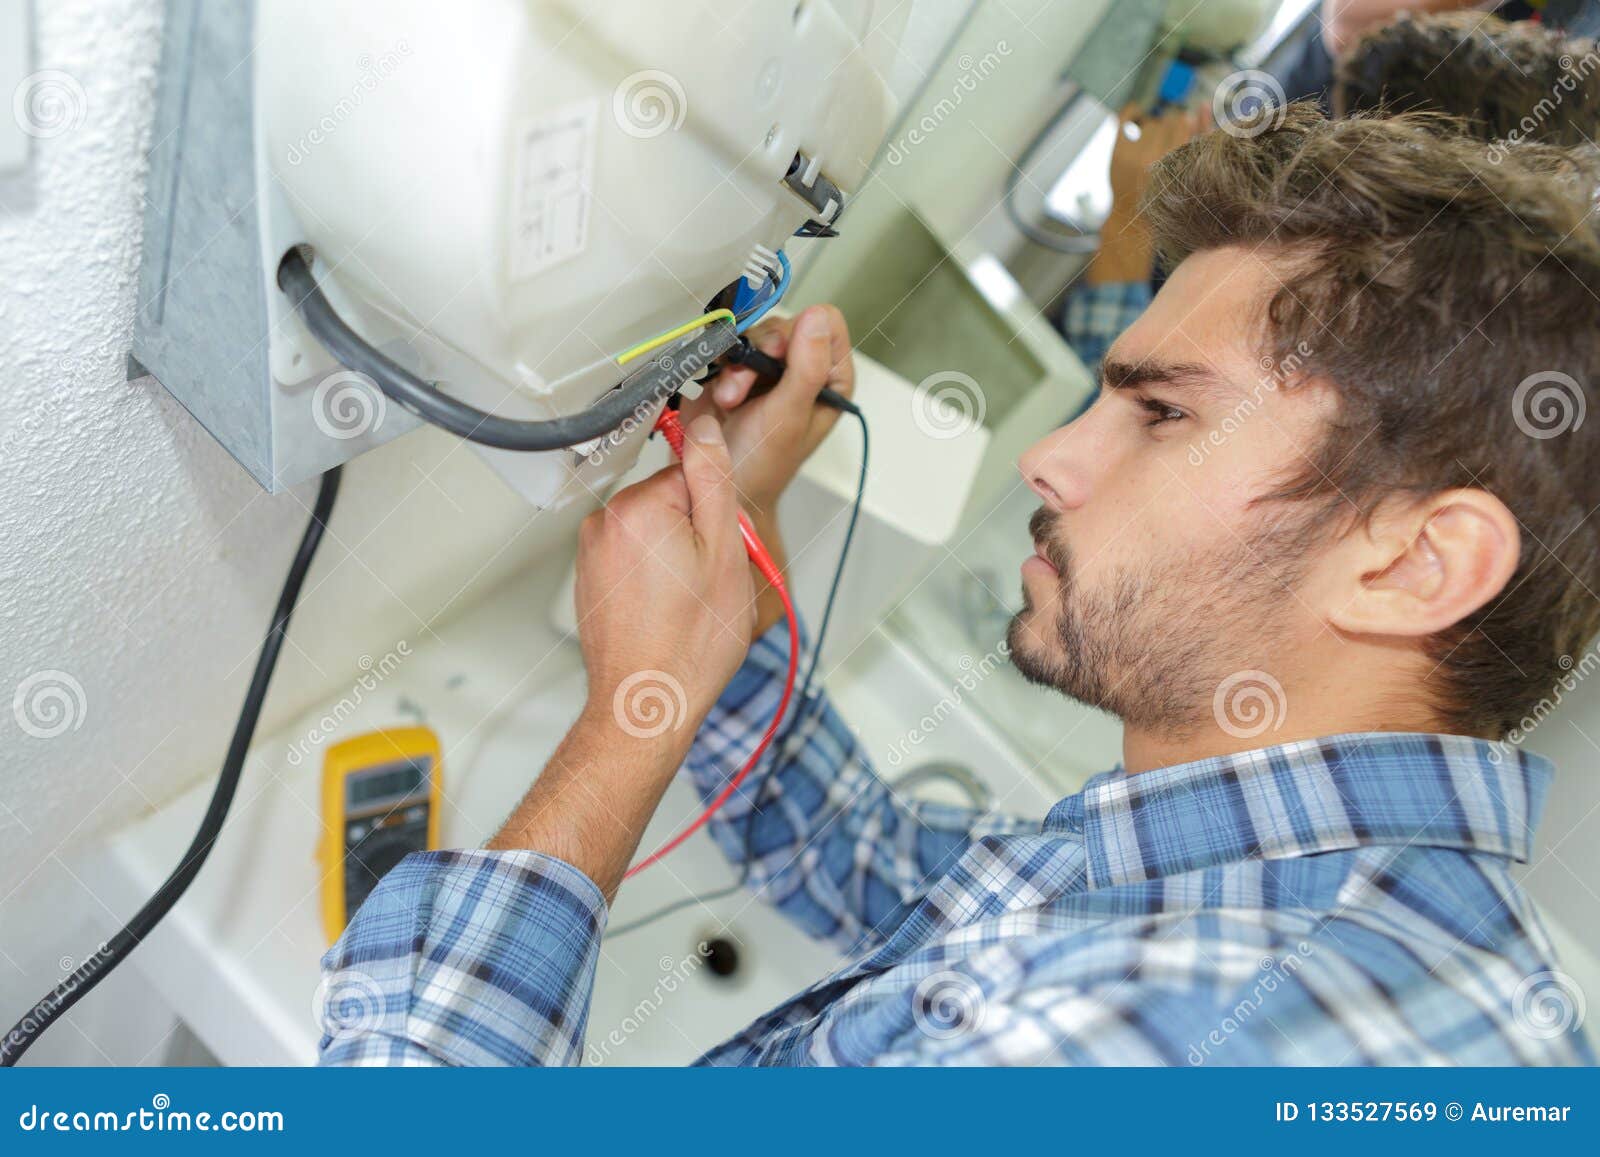 Tradesman Fixing Electrical Issue With Hand Dryer